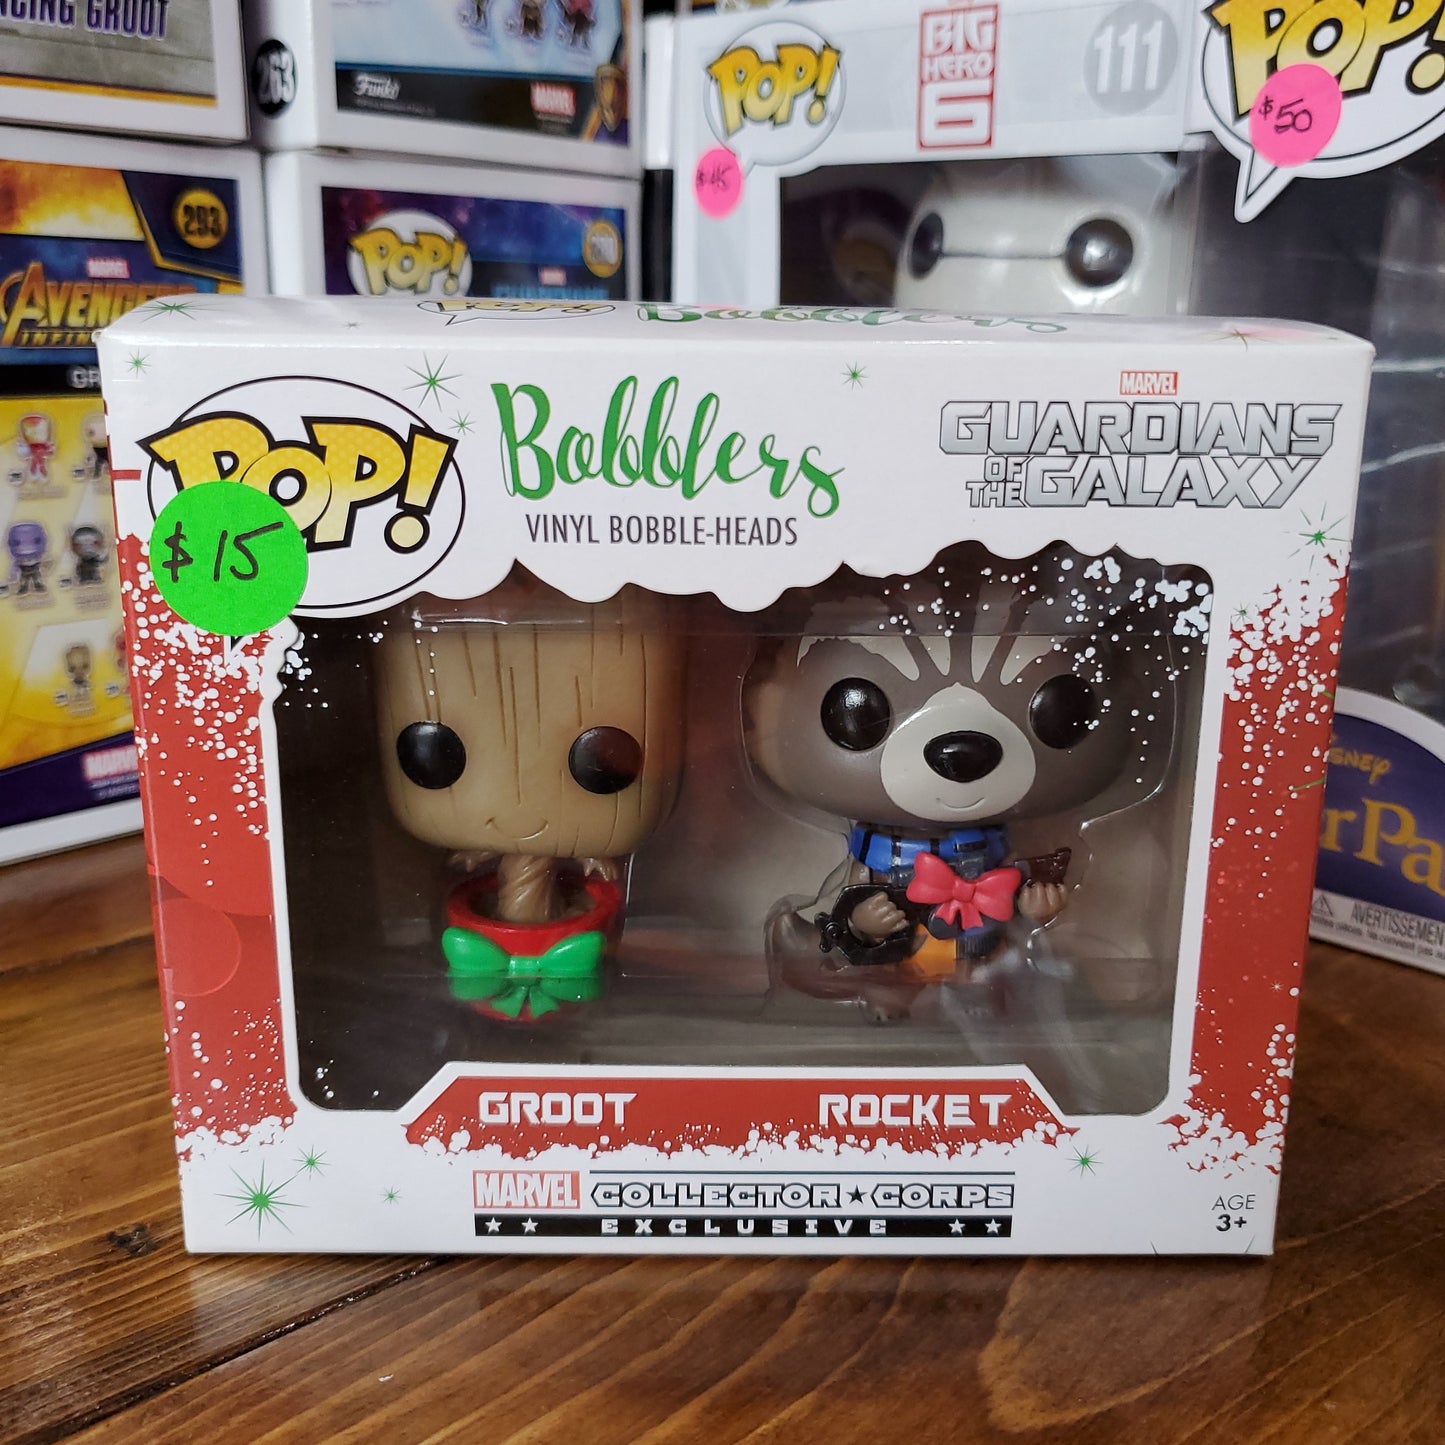 Groot and Rocket - Marvel Collector Corps - Funko Pop! Bobblers